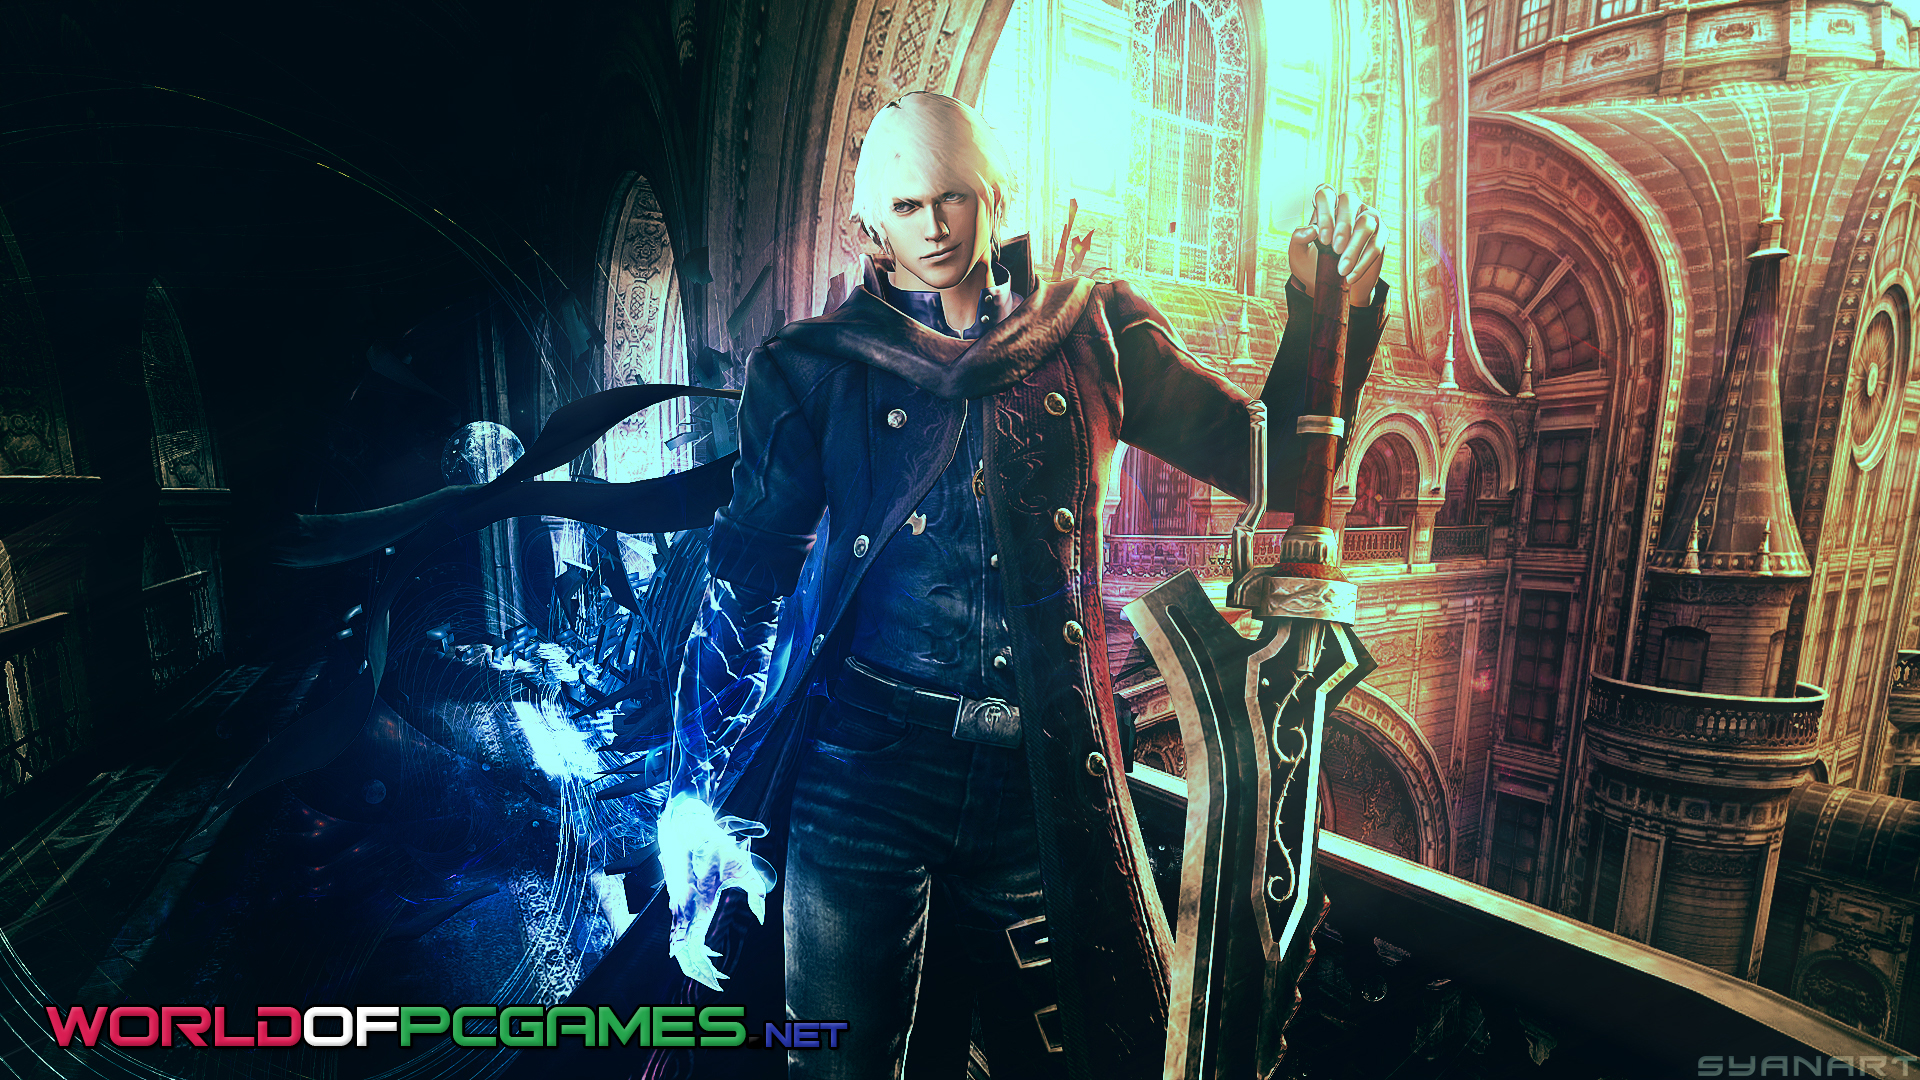 Devil May Cry 4 Free Download PC Game By worldof-pcgames.netm